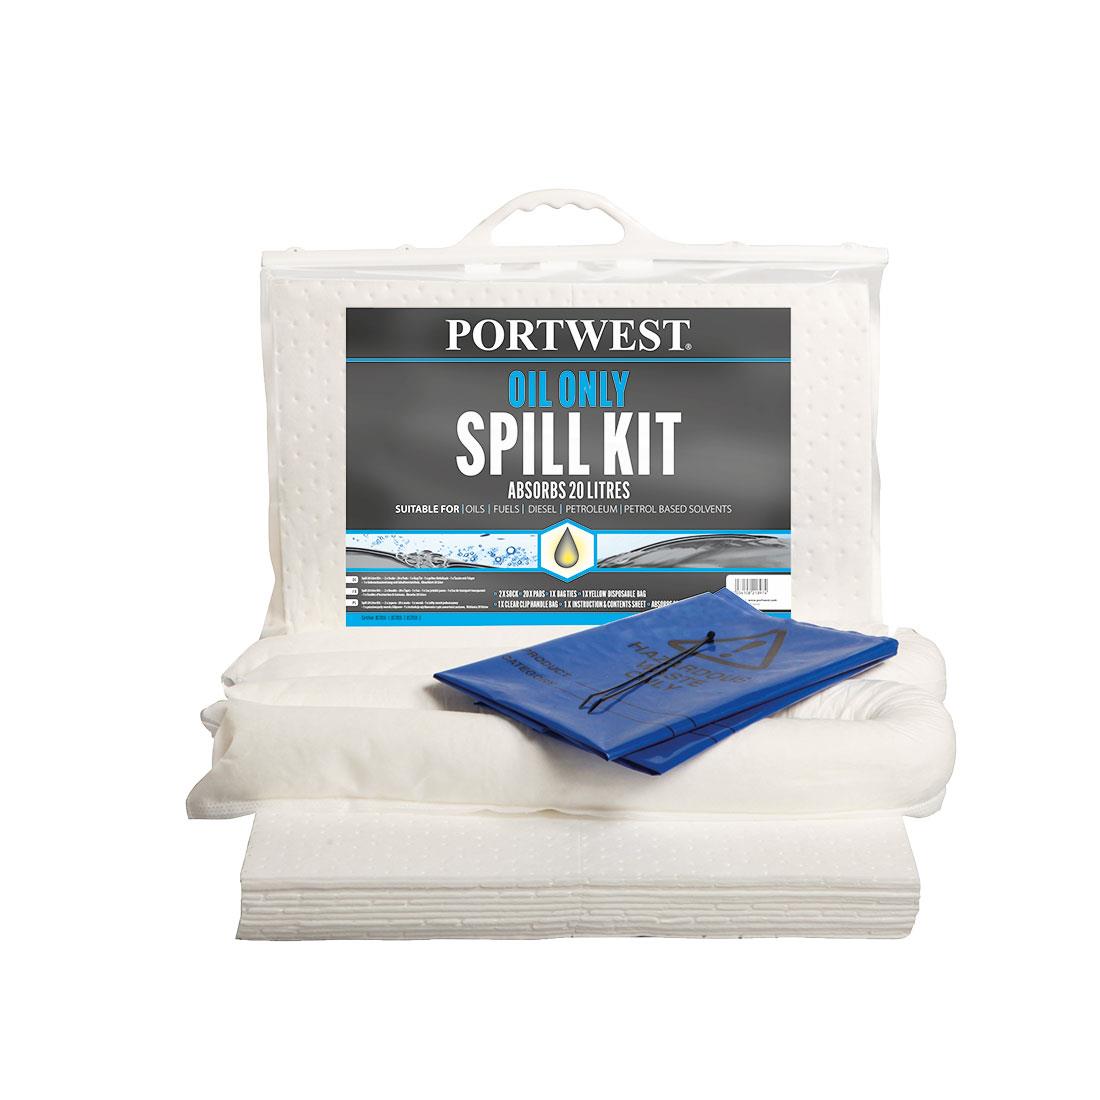 Portwest 20 litre oil only spill kit with socks and pads (1 kit) #SM60